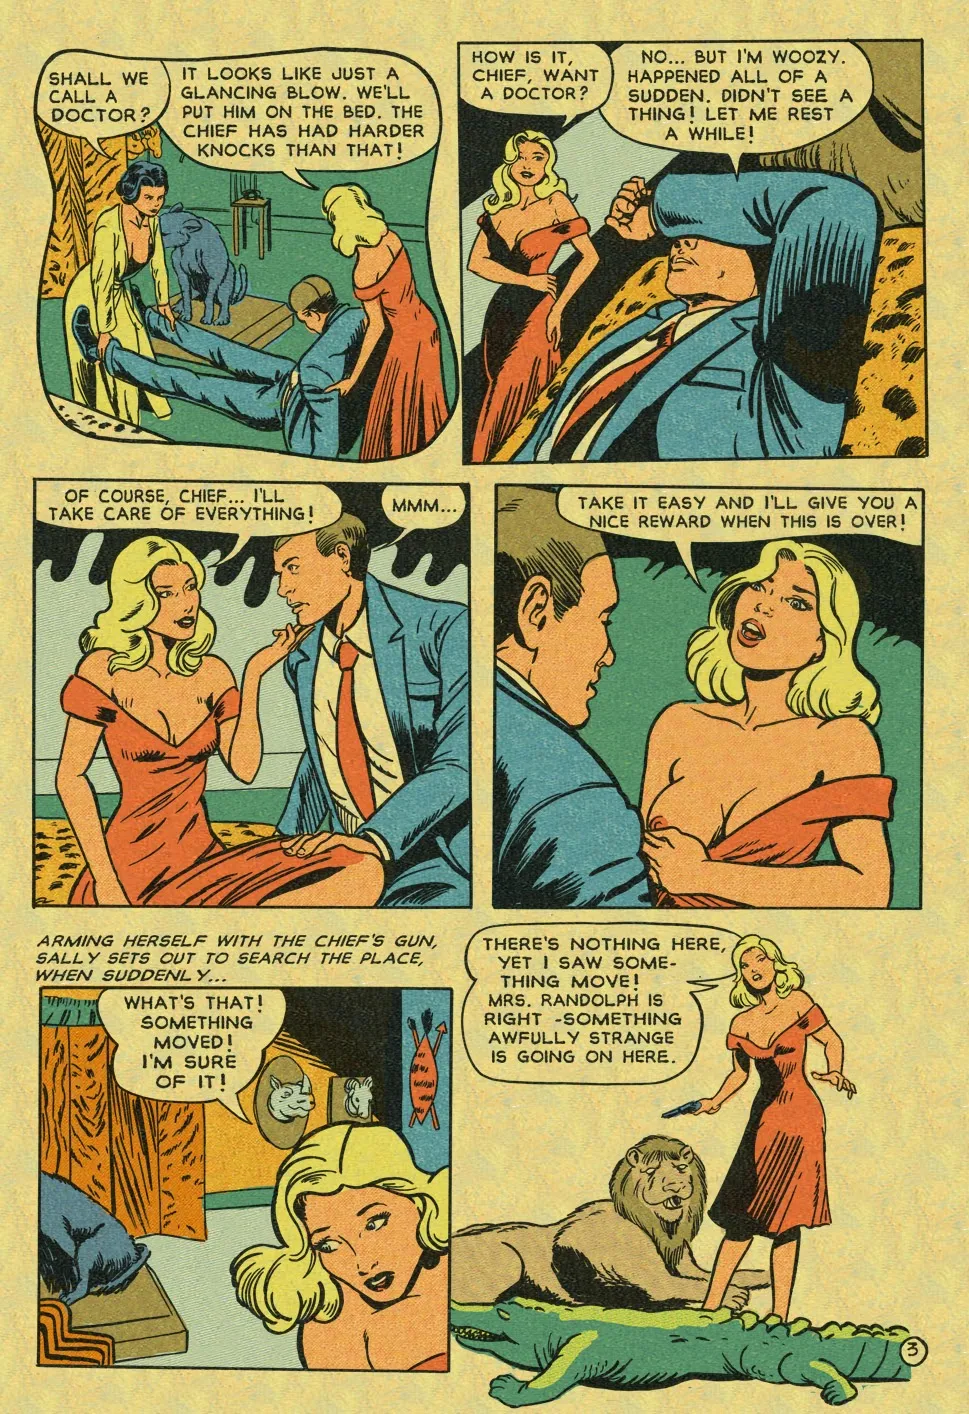 Crime Smashers! 2- The Wertham Files - Page 4